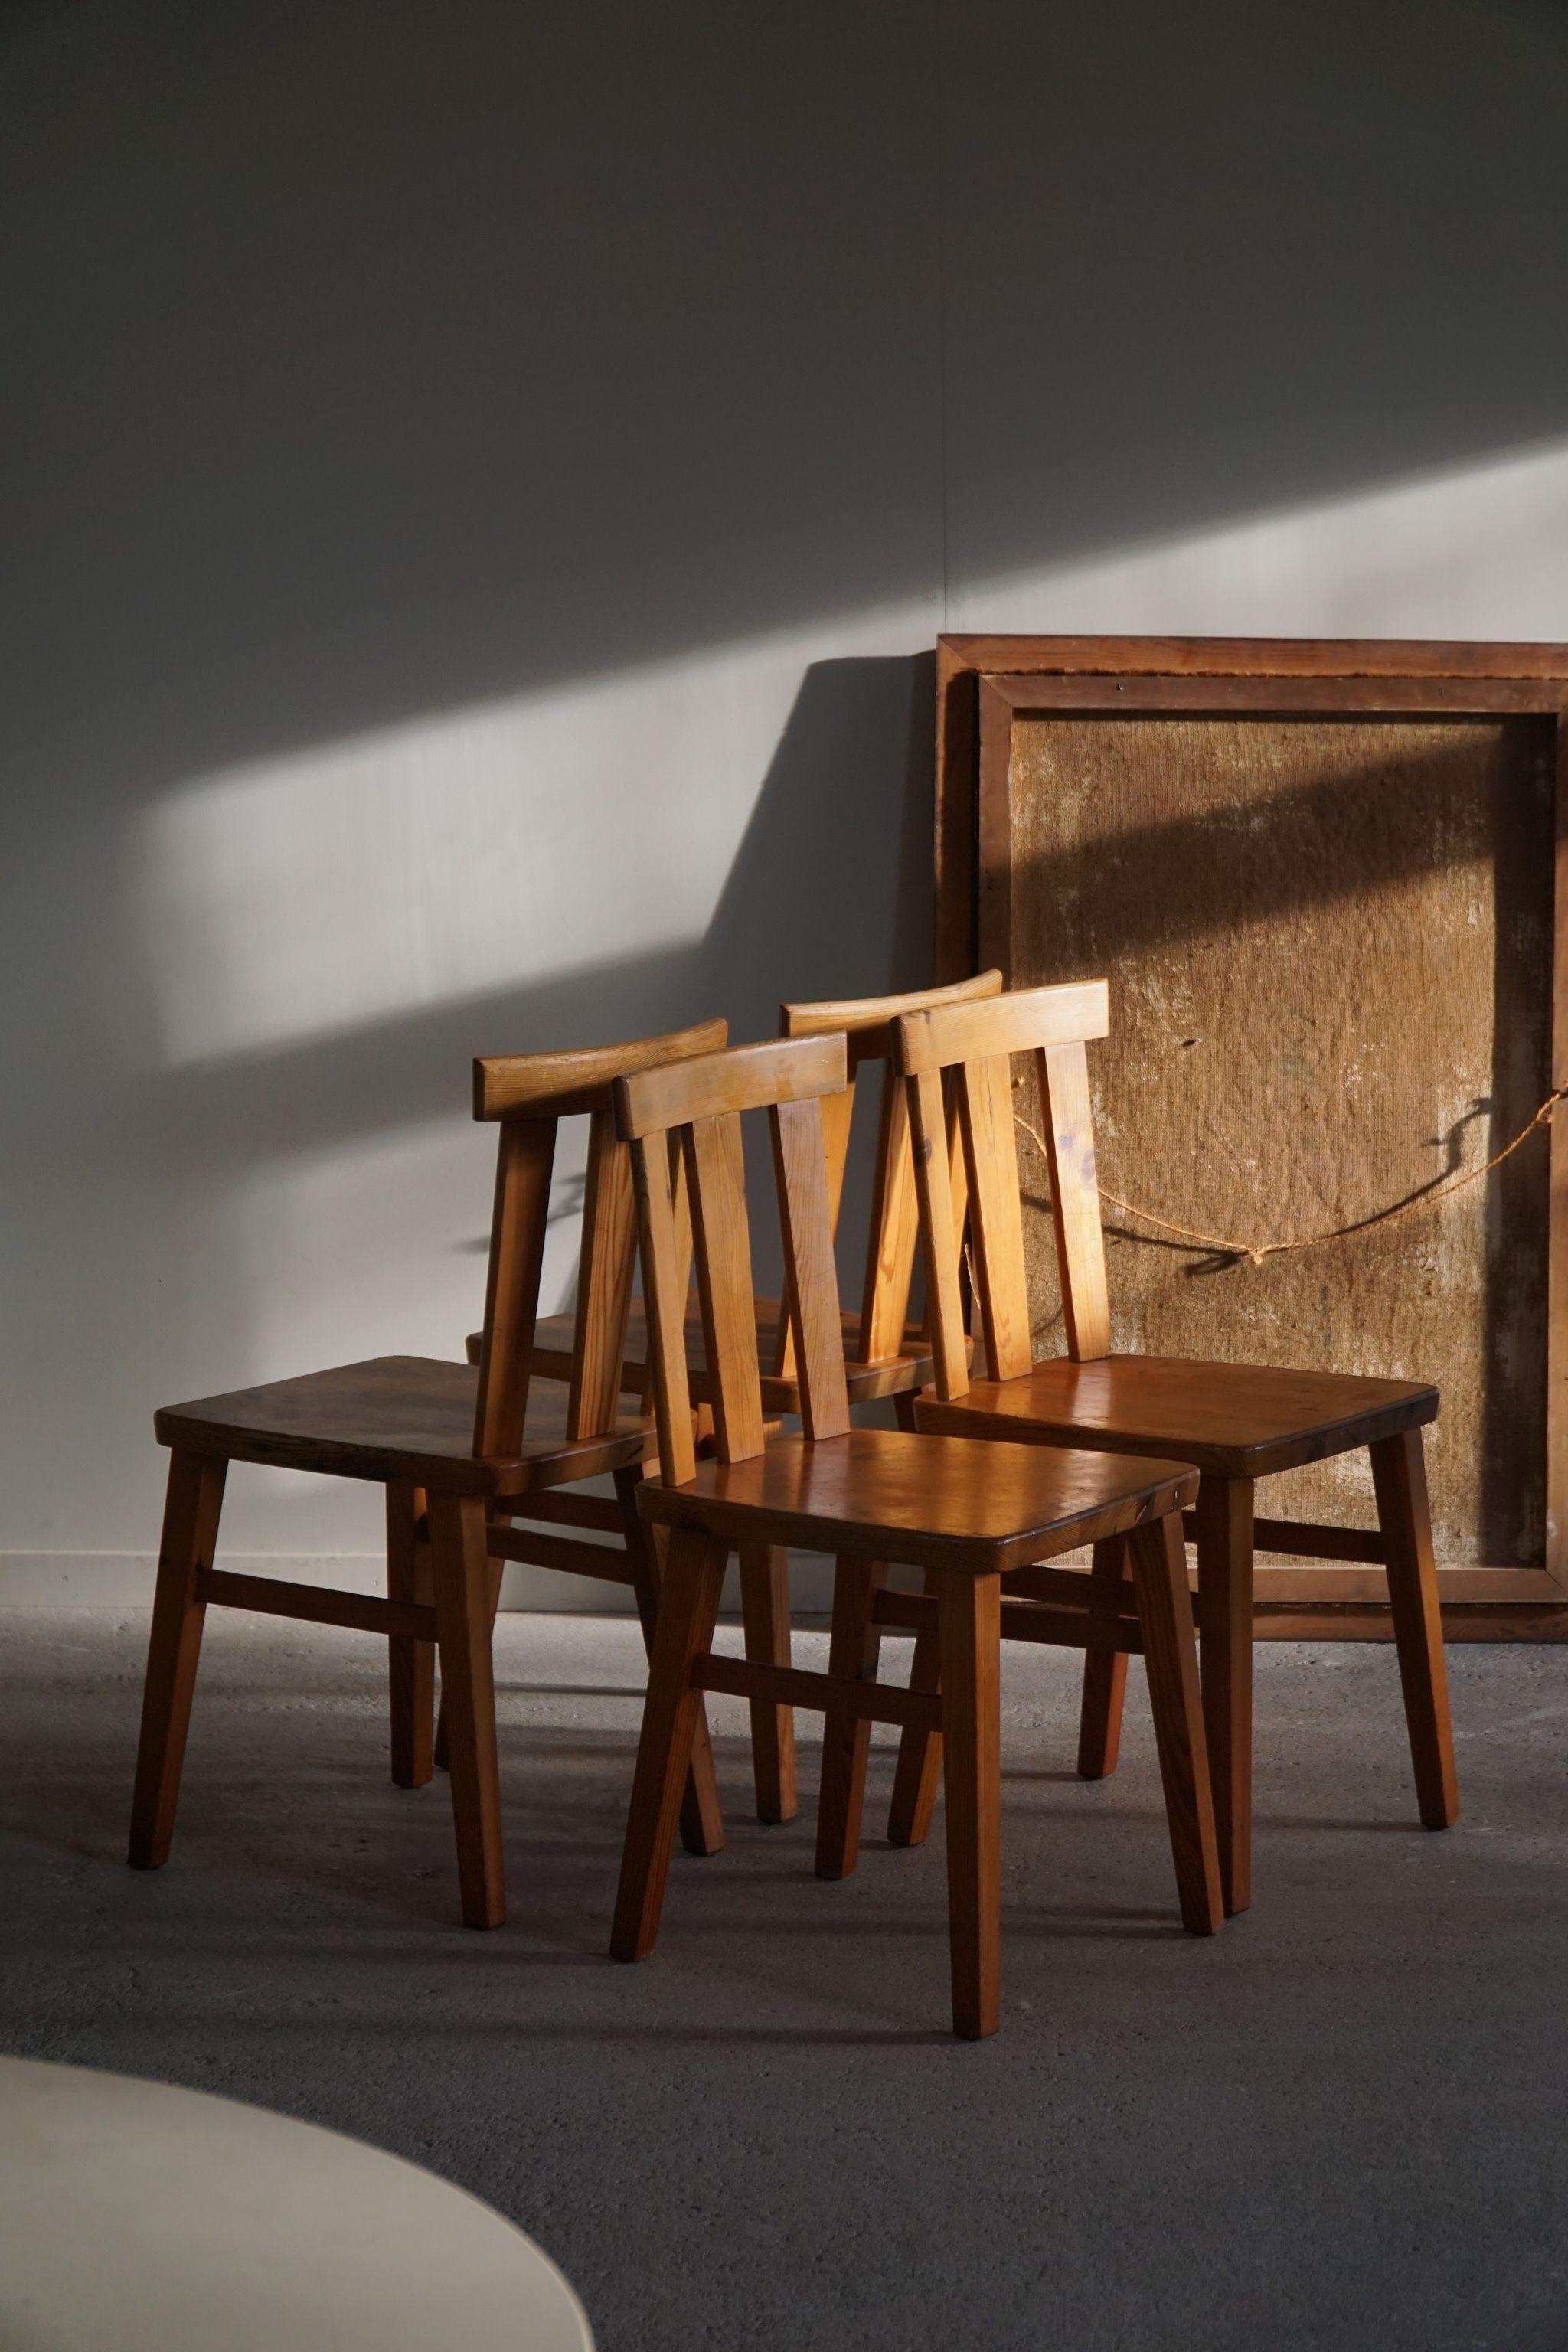 Swedish Modern, Set of 4 Chairs in Solid Pine, Axel Einar Hjorth Style, 1950s For Sale 9